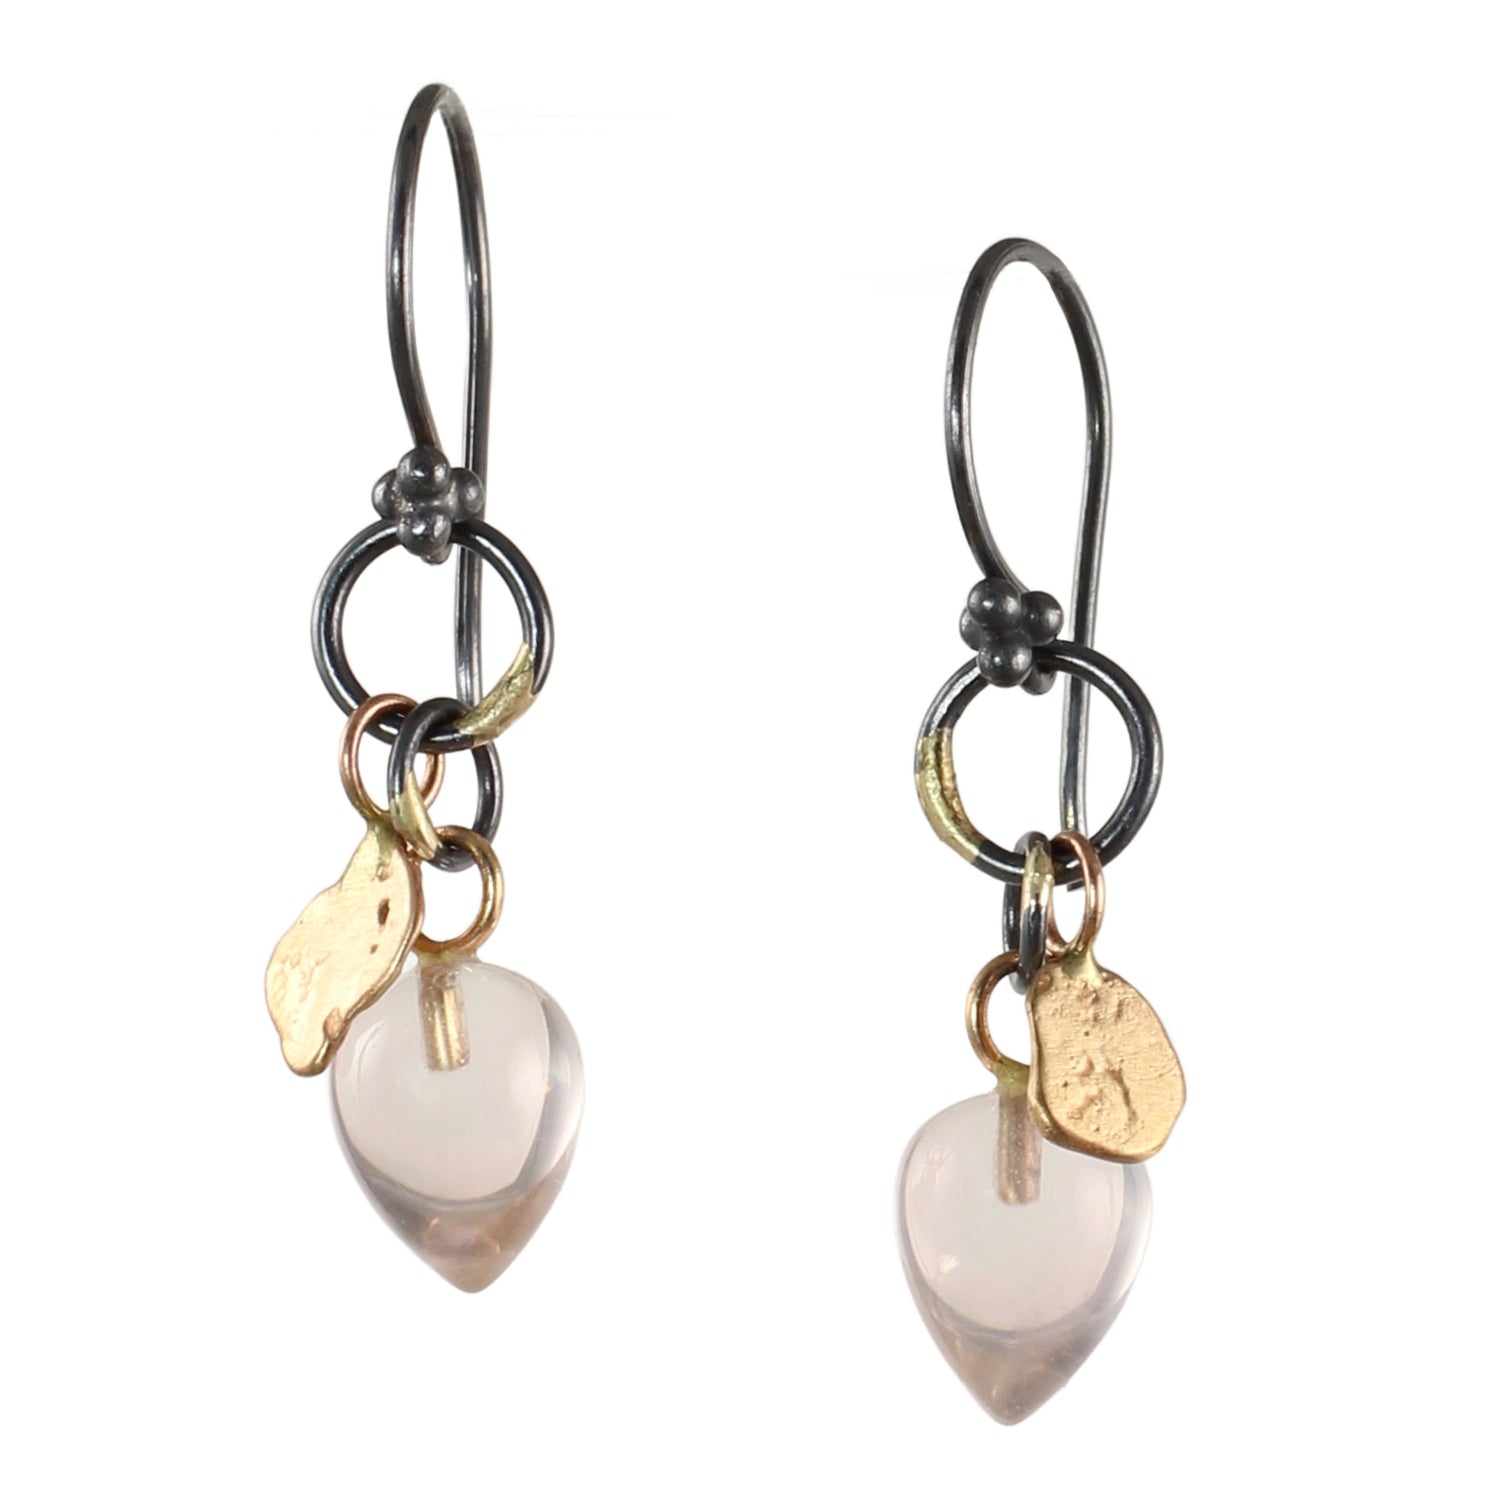 Rosy Bauble & Mixed Metal Linked Earrings with 14k Gold